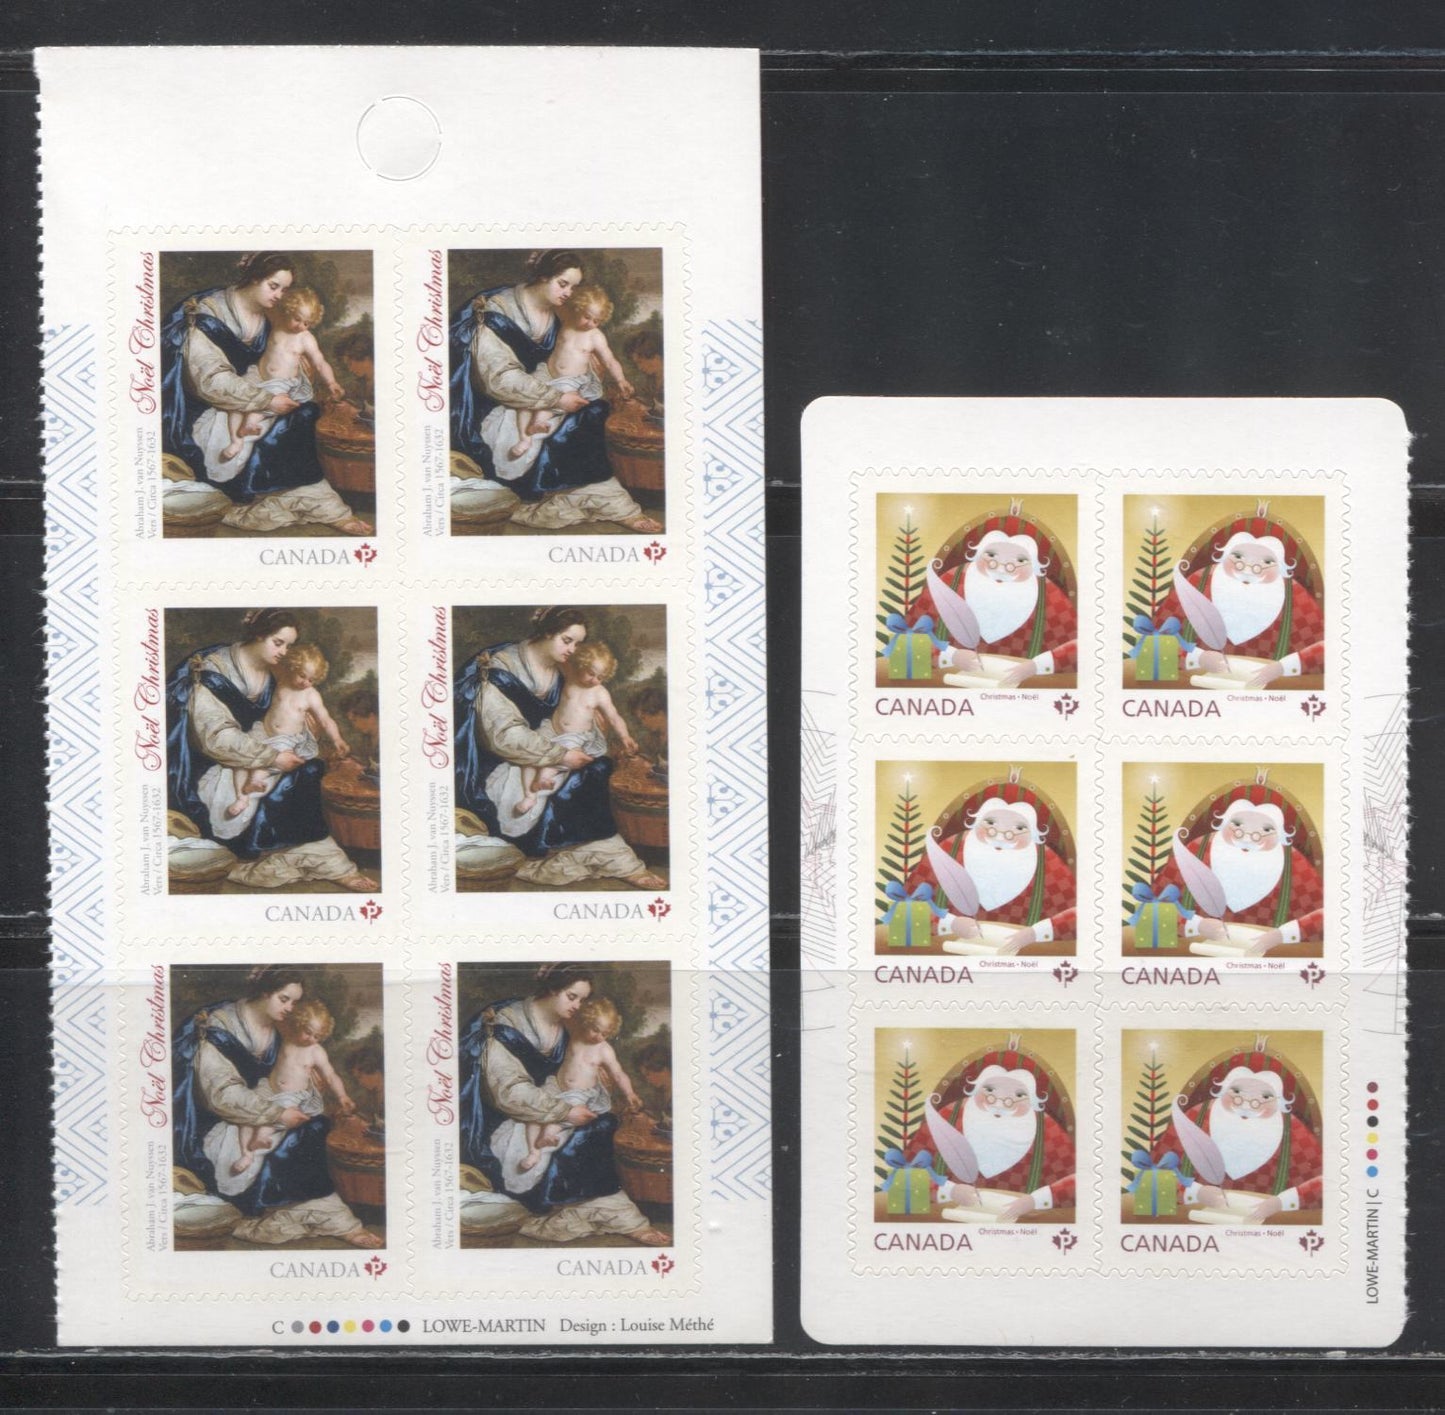 Lot 138A Canada #2797, 2798 2014 Christmas Issue, VFNH Booklet Panes of 6 of the "P" Stamps on LF TRC Paper